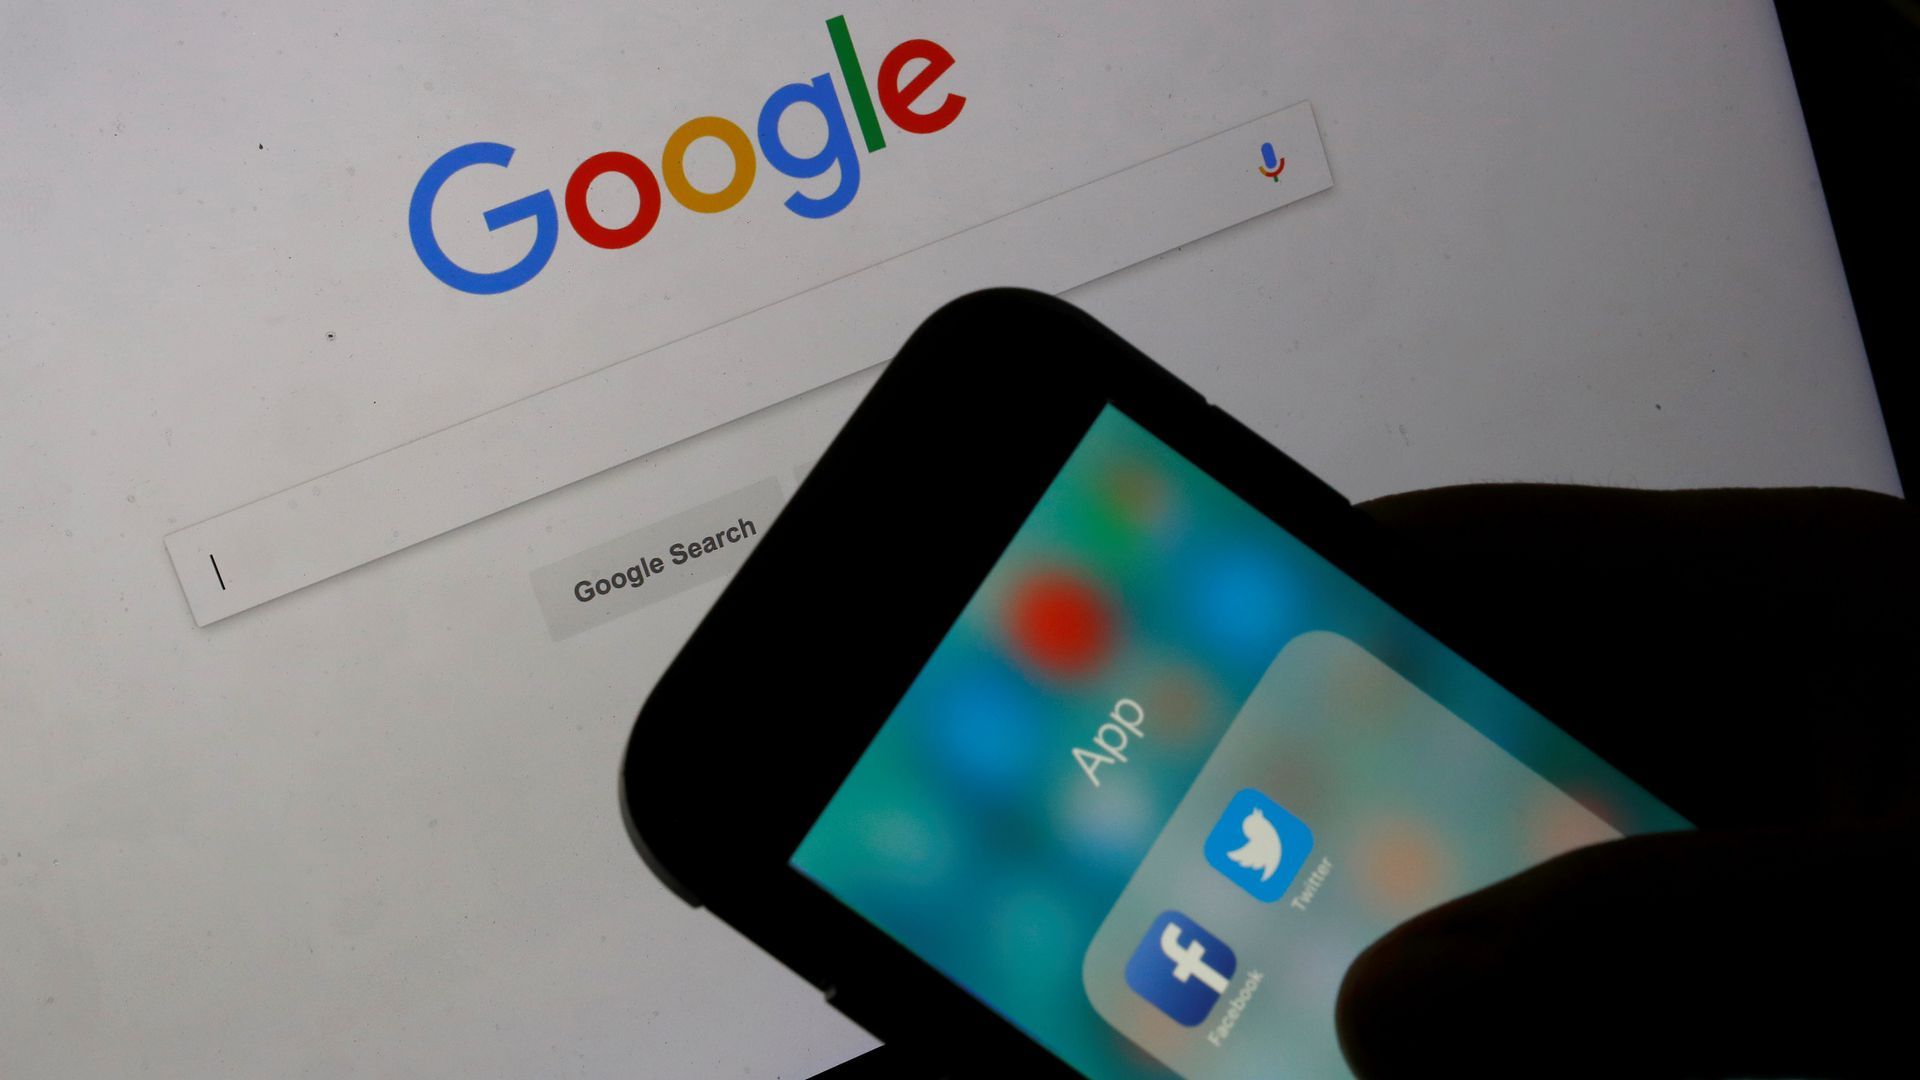 An iPhone showing Twitter and Facebook in front of a Google search page